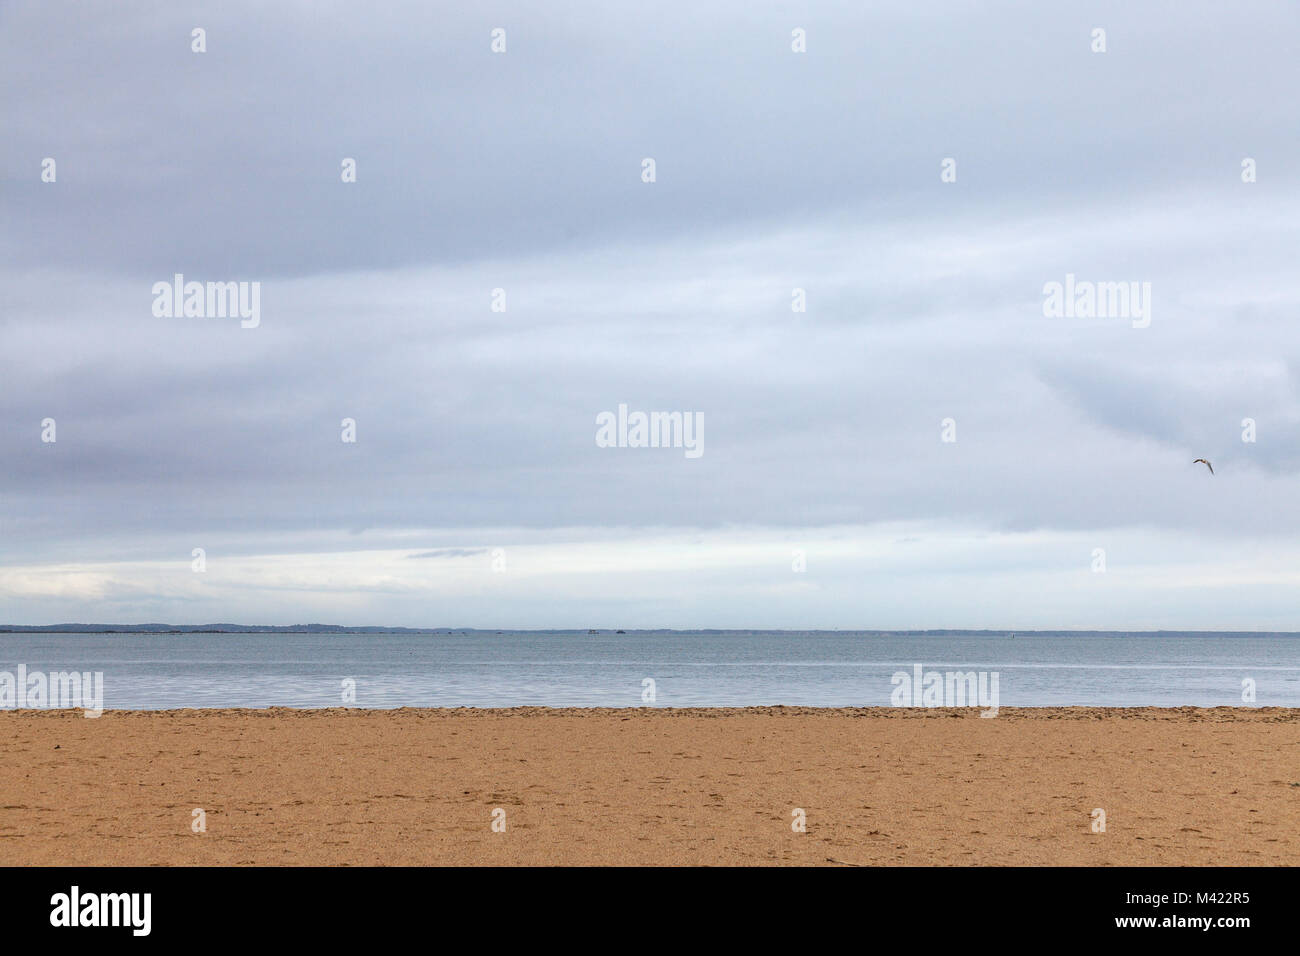 Atlantic ocean in Gujan Mestras, Bassin d'Arcachon, France, during a storm on a cloudy rainy afternoon. This place is famous for its oyster parks and  Stock Photo